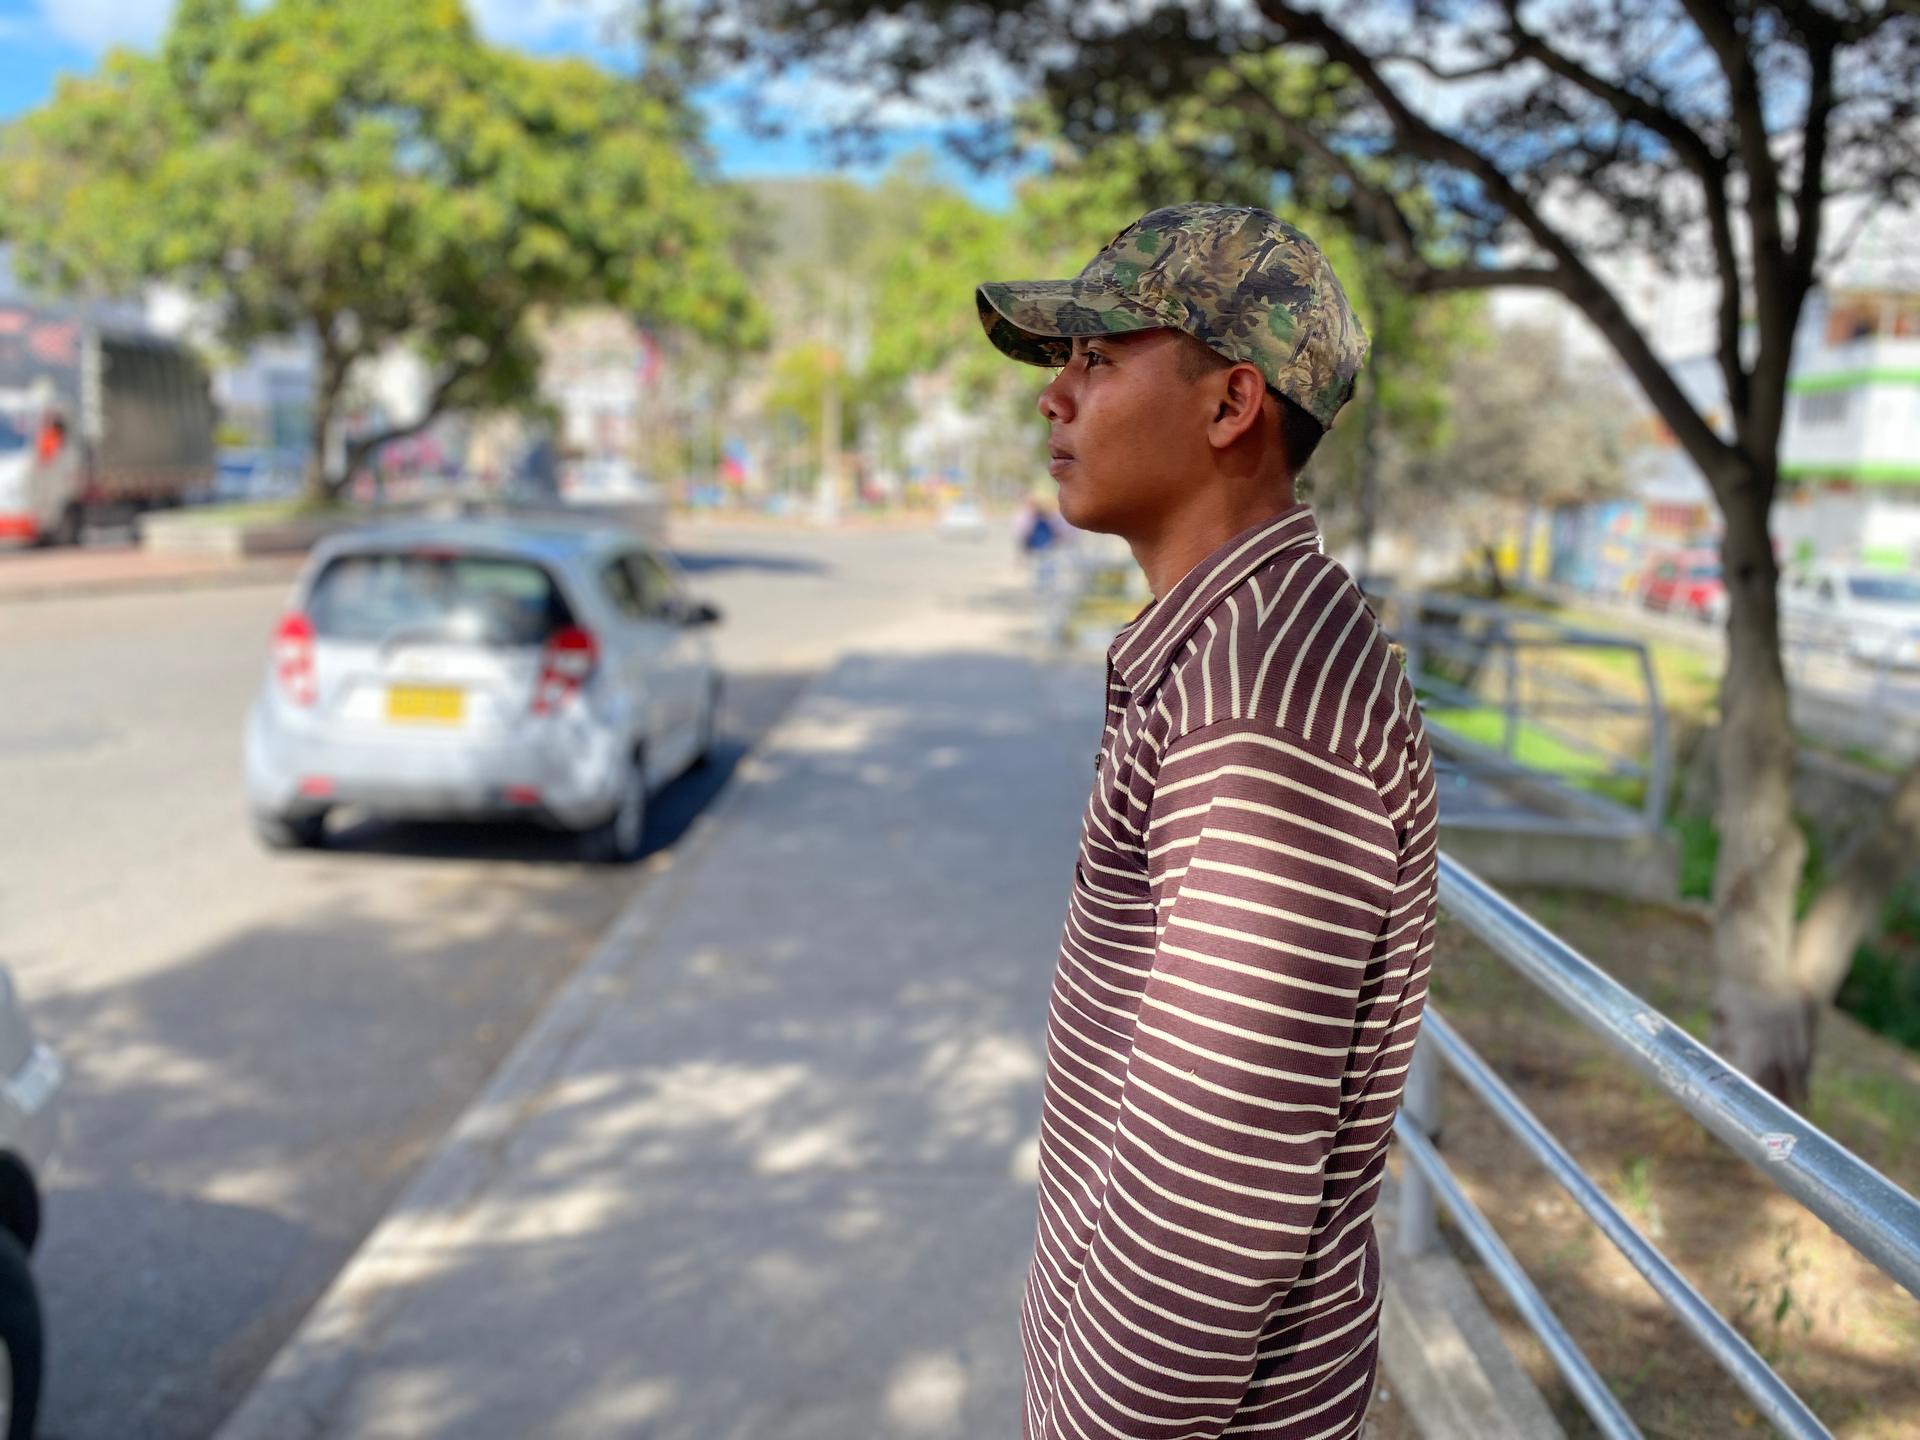 A young man wears a camouflage hat with brown and cream striped shirt and stands outside near a parked car.